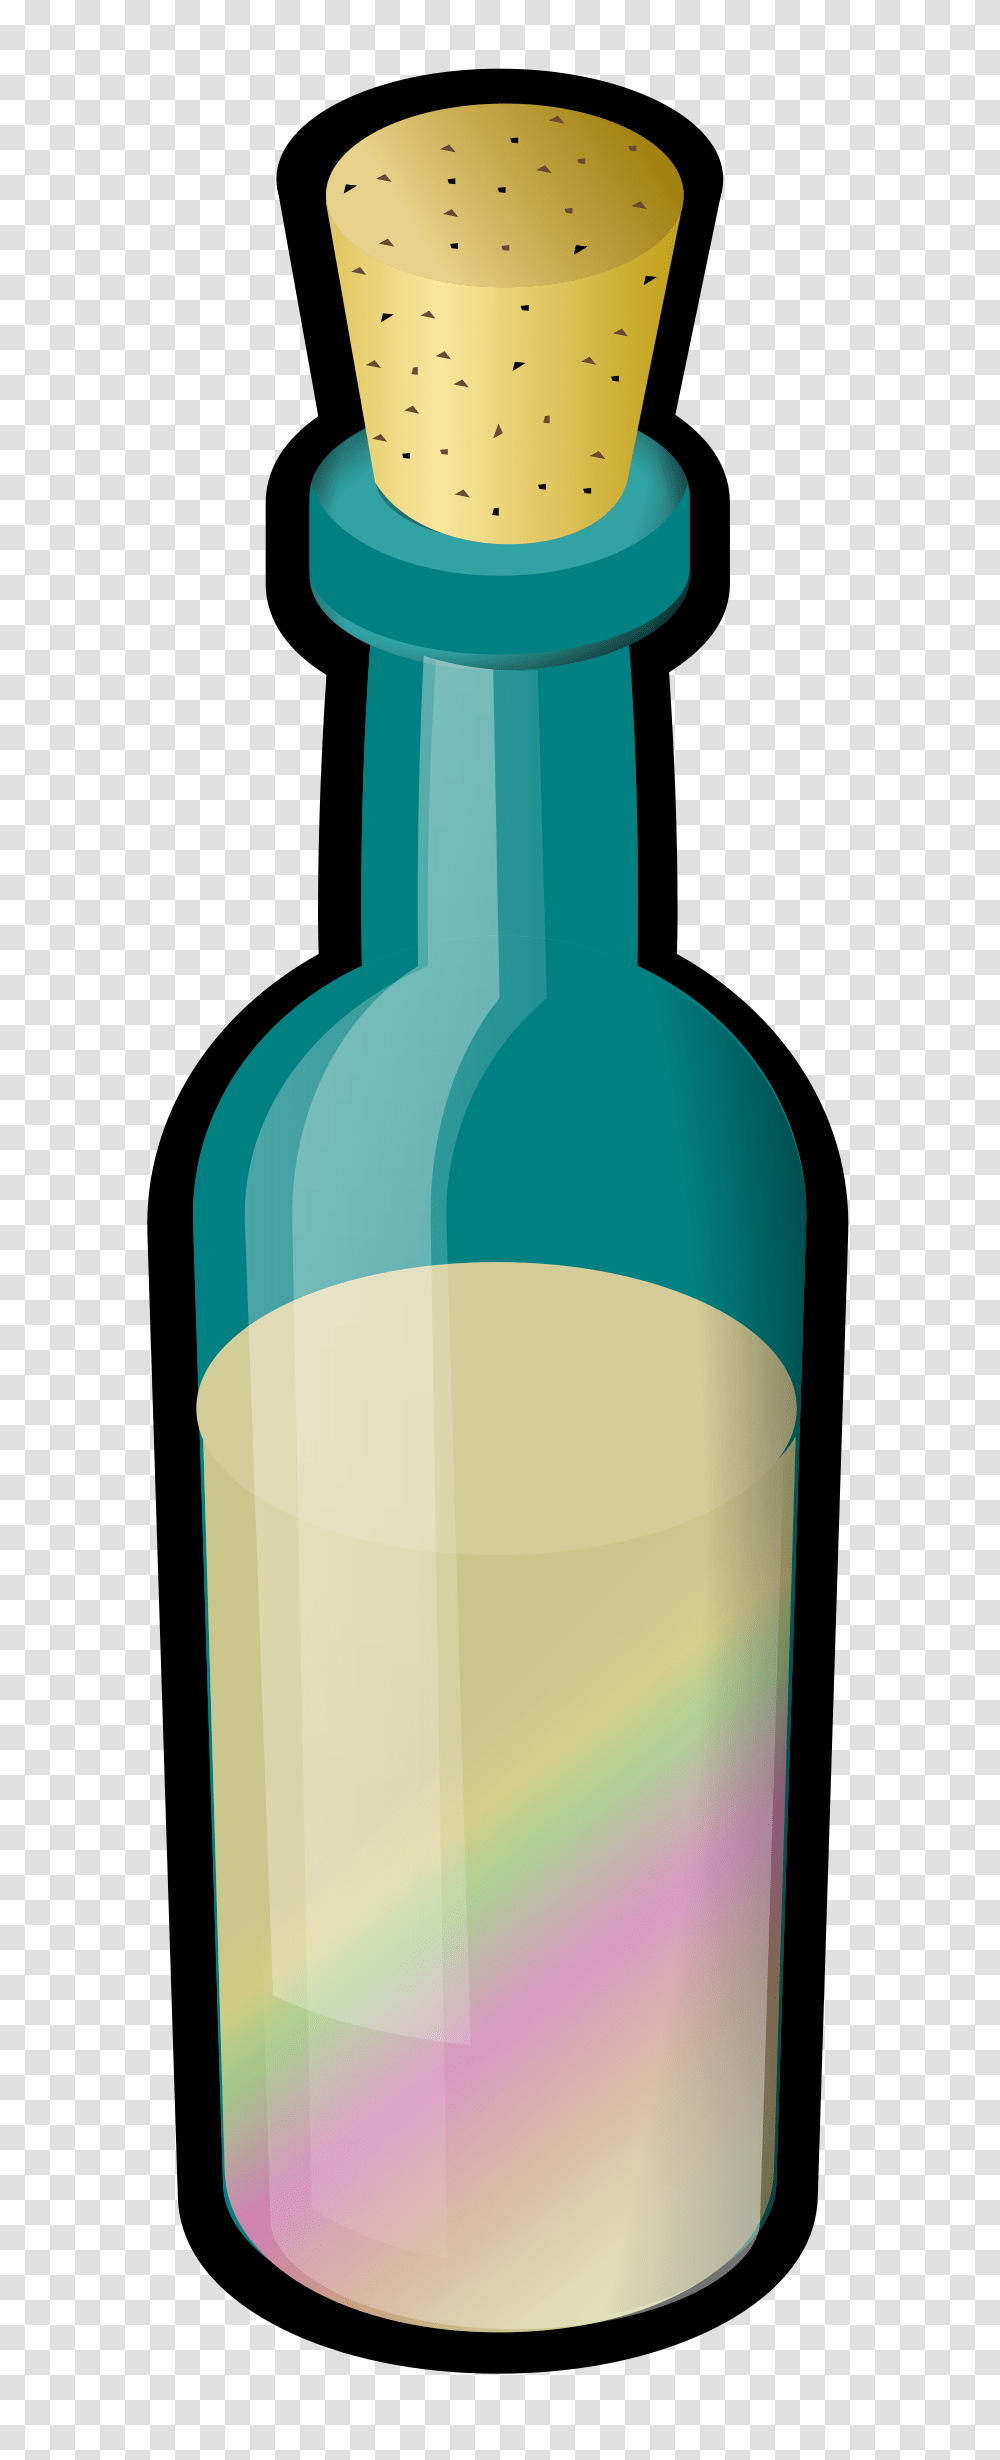 Bottle Of Colored Sand With Cork Icons, Beverage, Drink, Alcohol, Wine Transparent Png